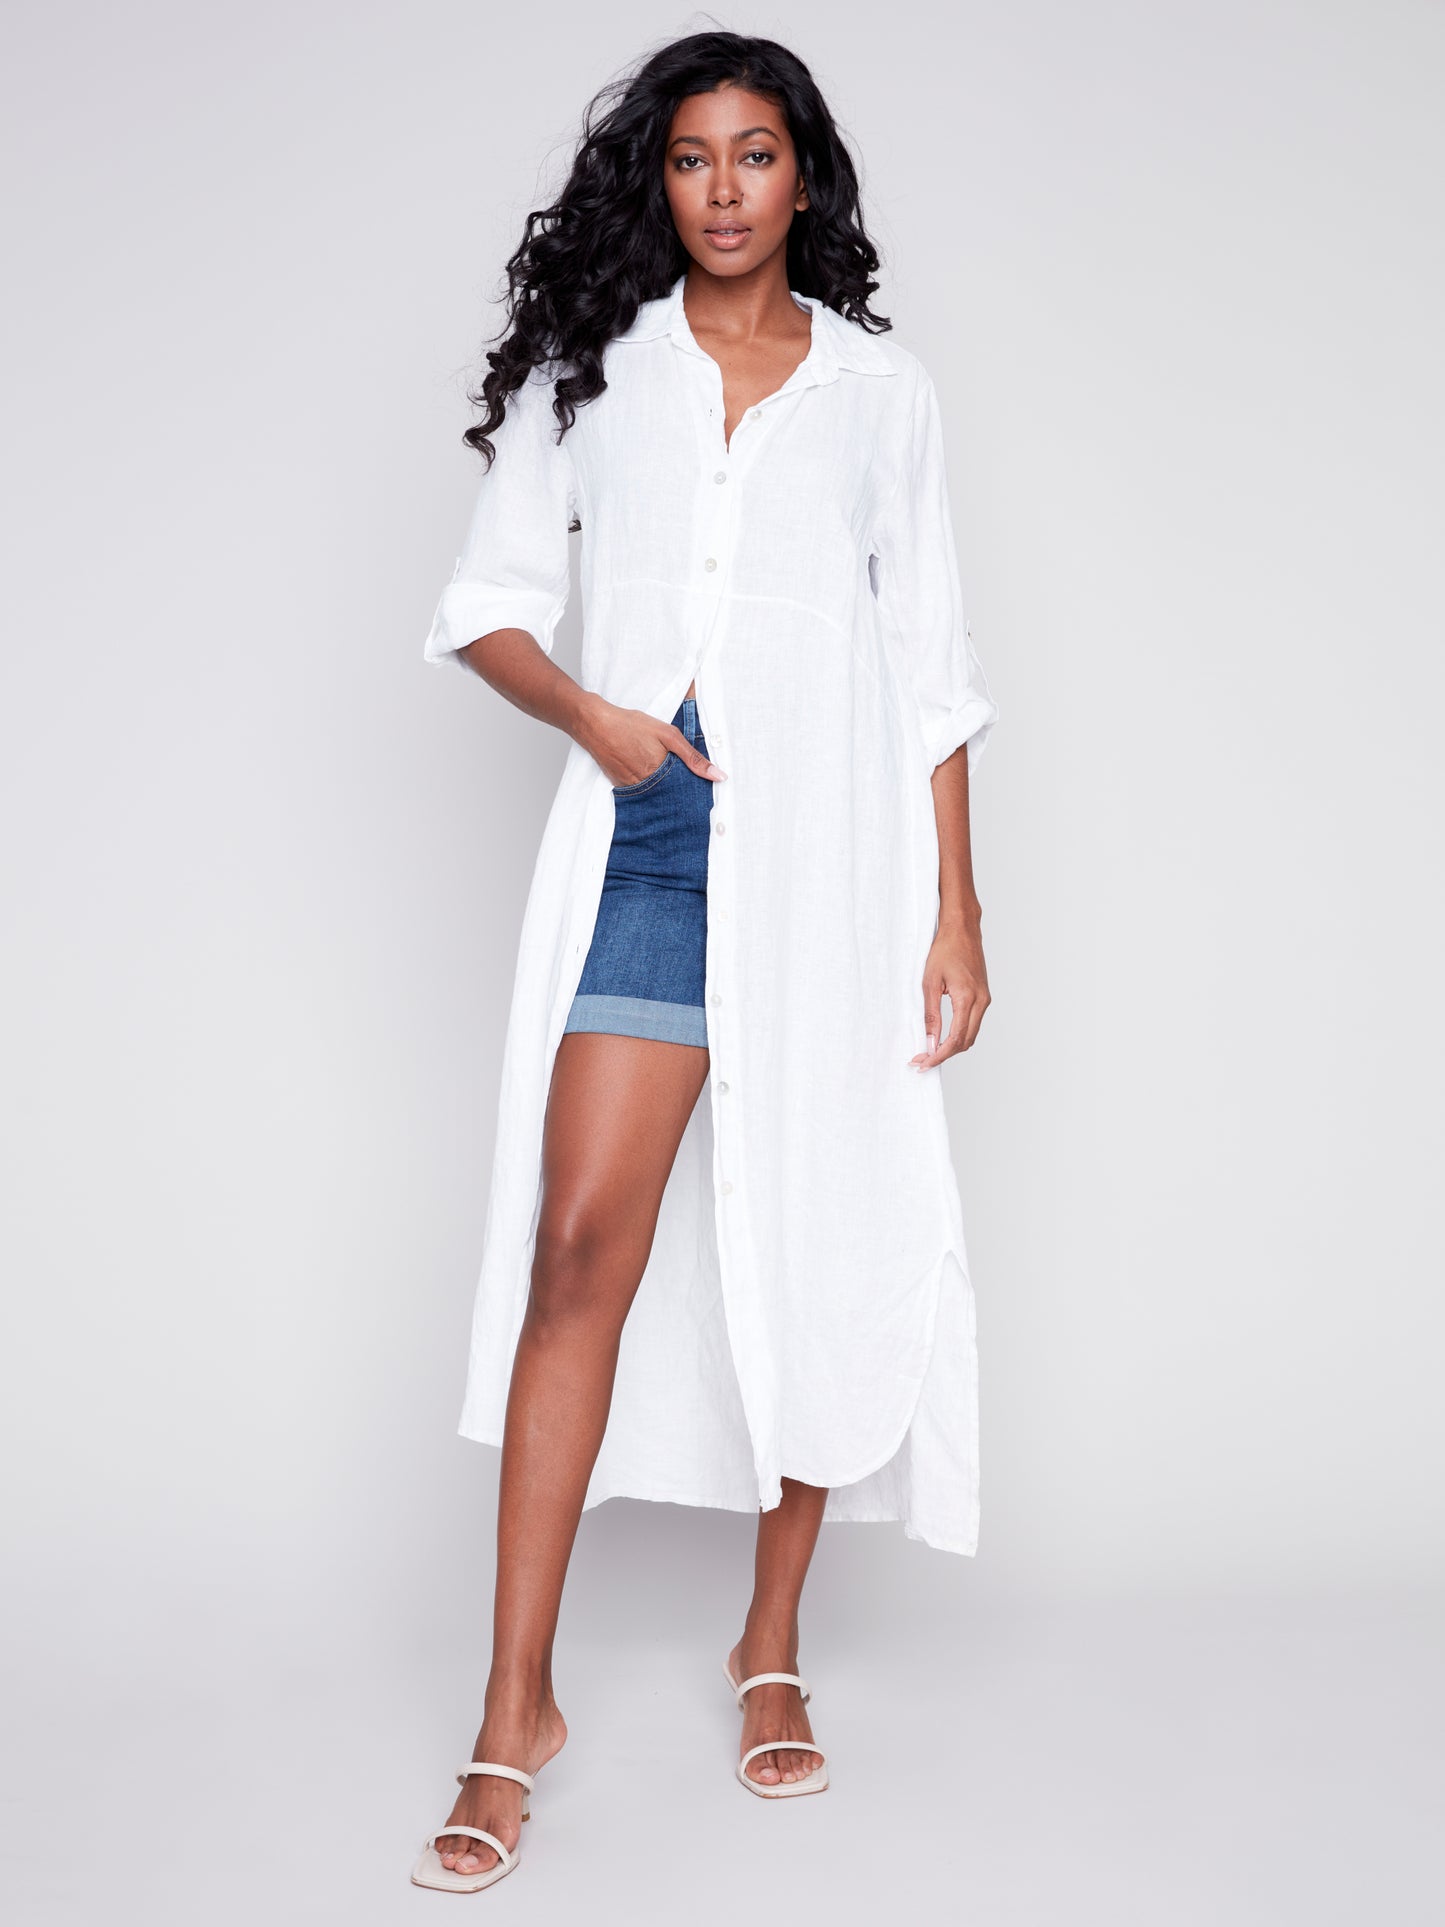 The model is wearing a white Charlie B duster with rolled-up sleeves and denim shorts.